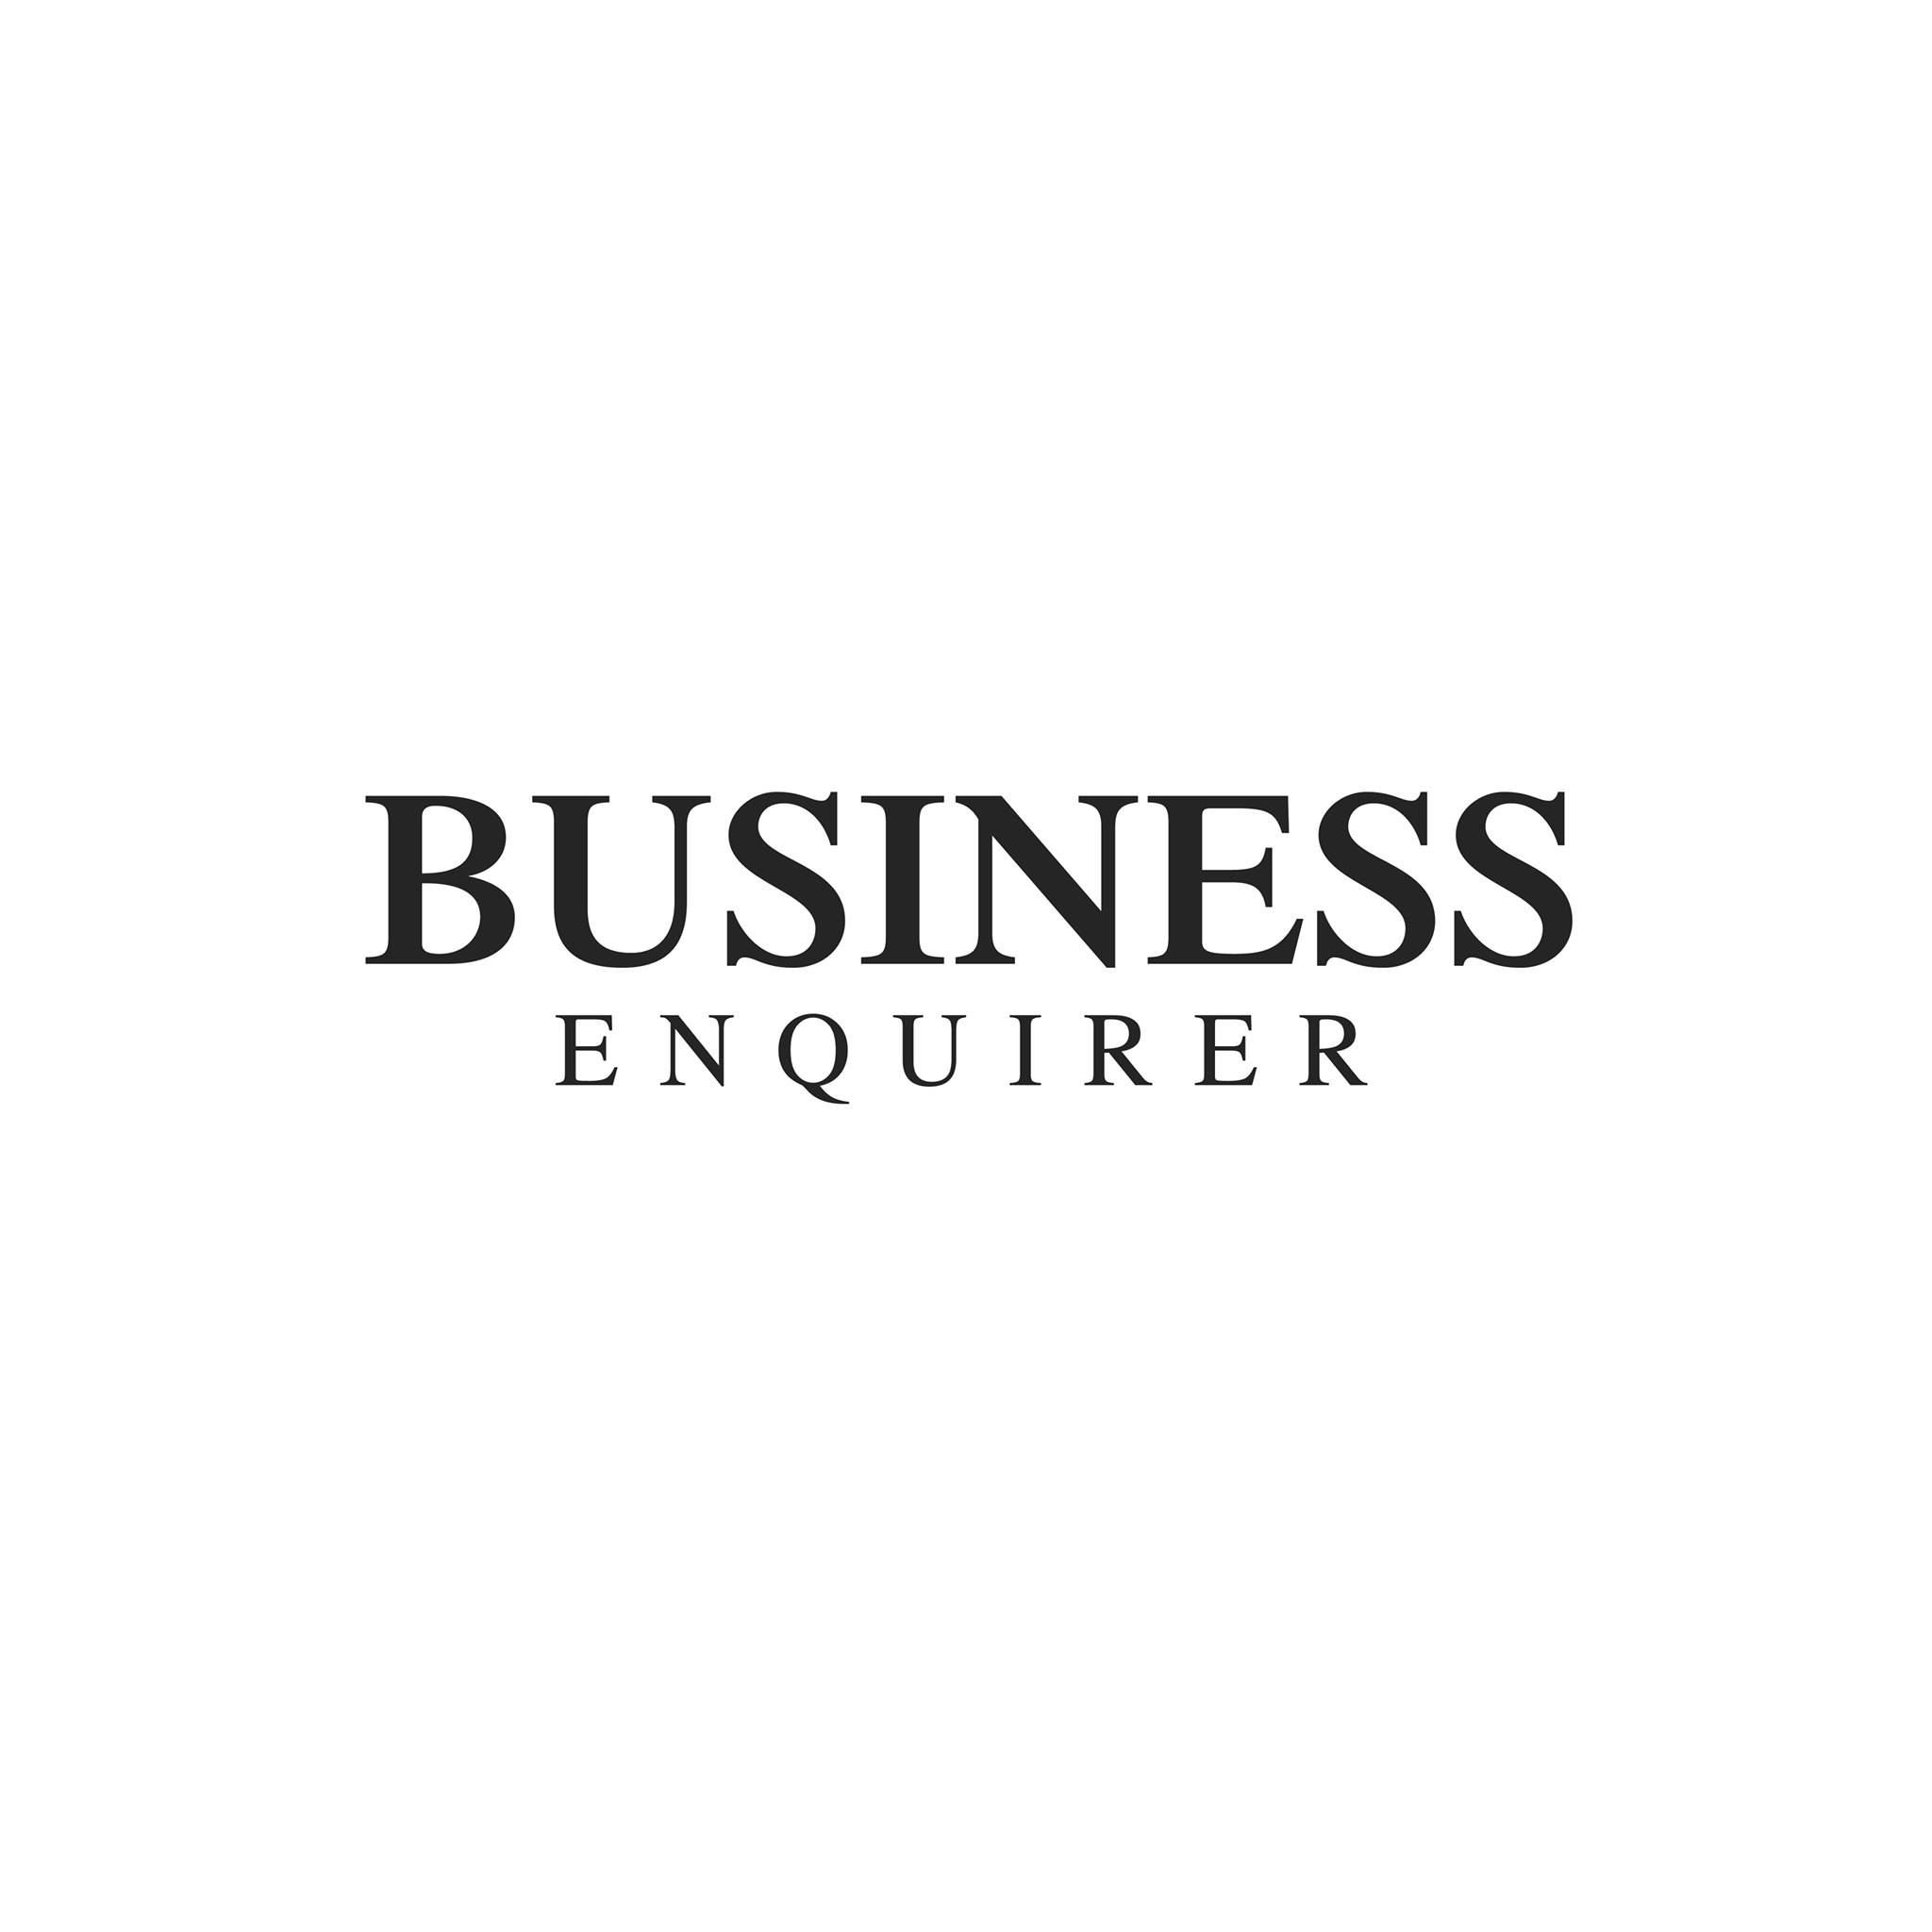 Business Enquirer - Fastest Growing Business Media Company In Europe